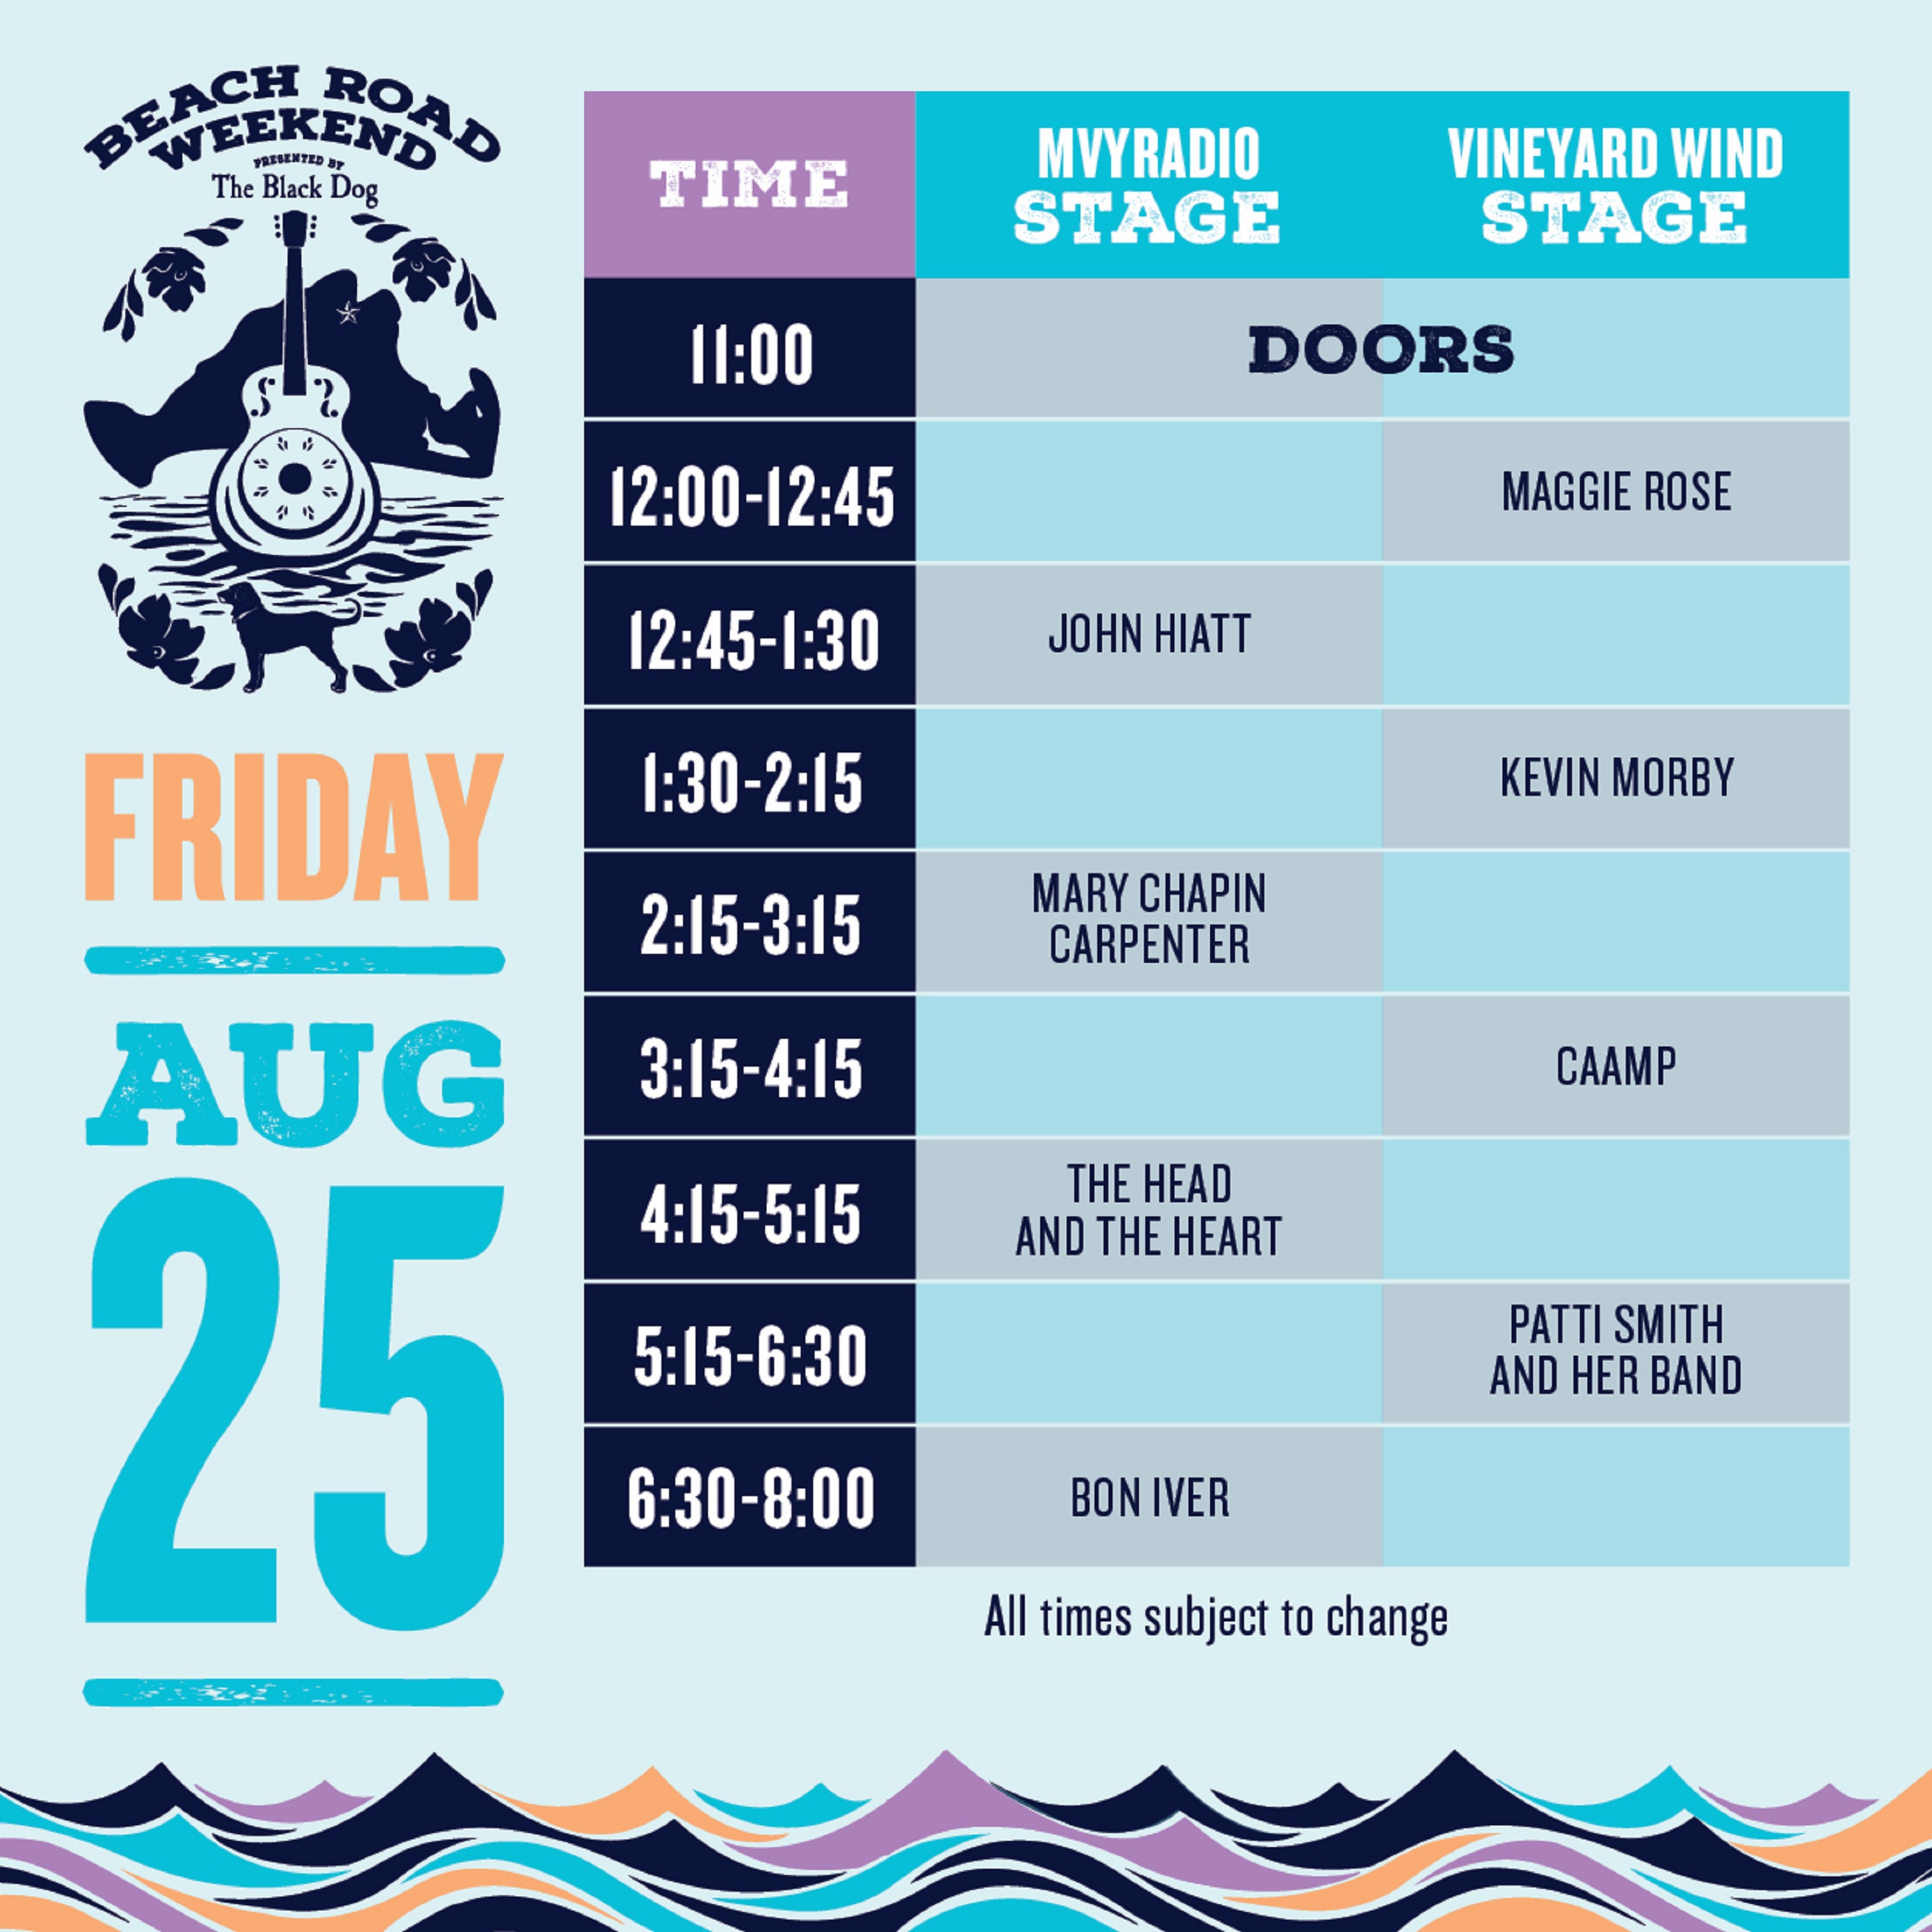 Beach Road Weekend Presented By The Black Dog Announces Daily Schedules